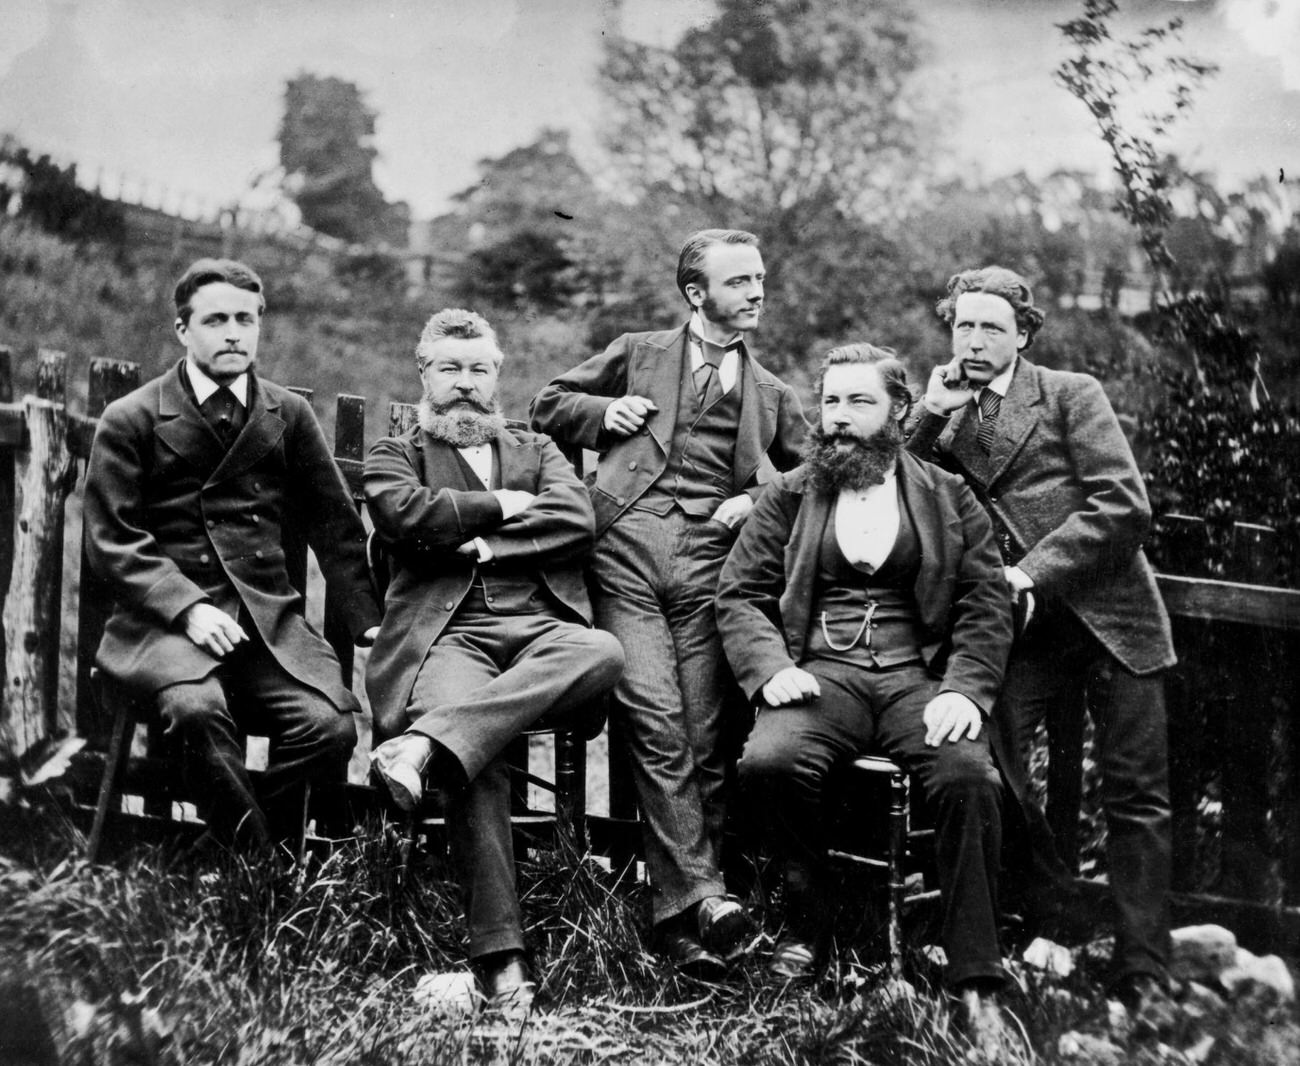 Sir William Henry Perkin and colleagues at the dyestuffs firm, circa 1870.